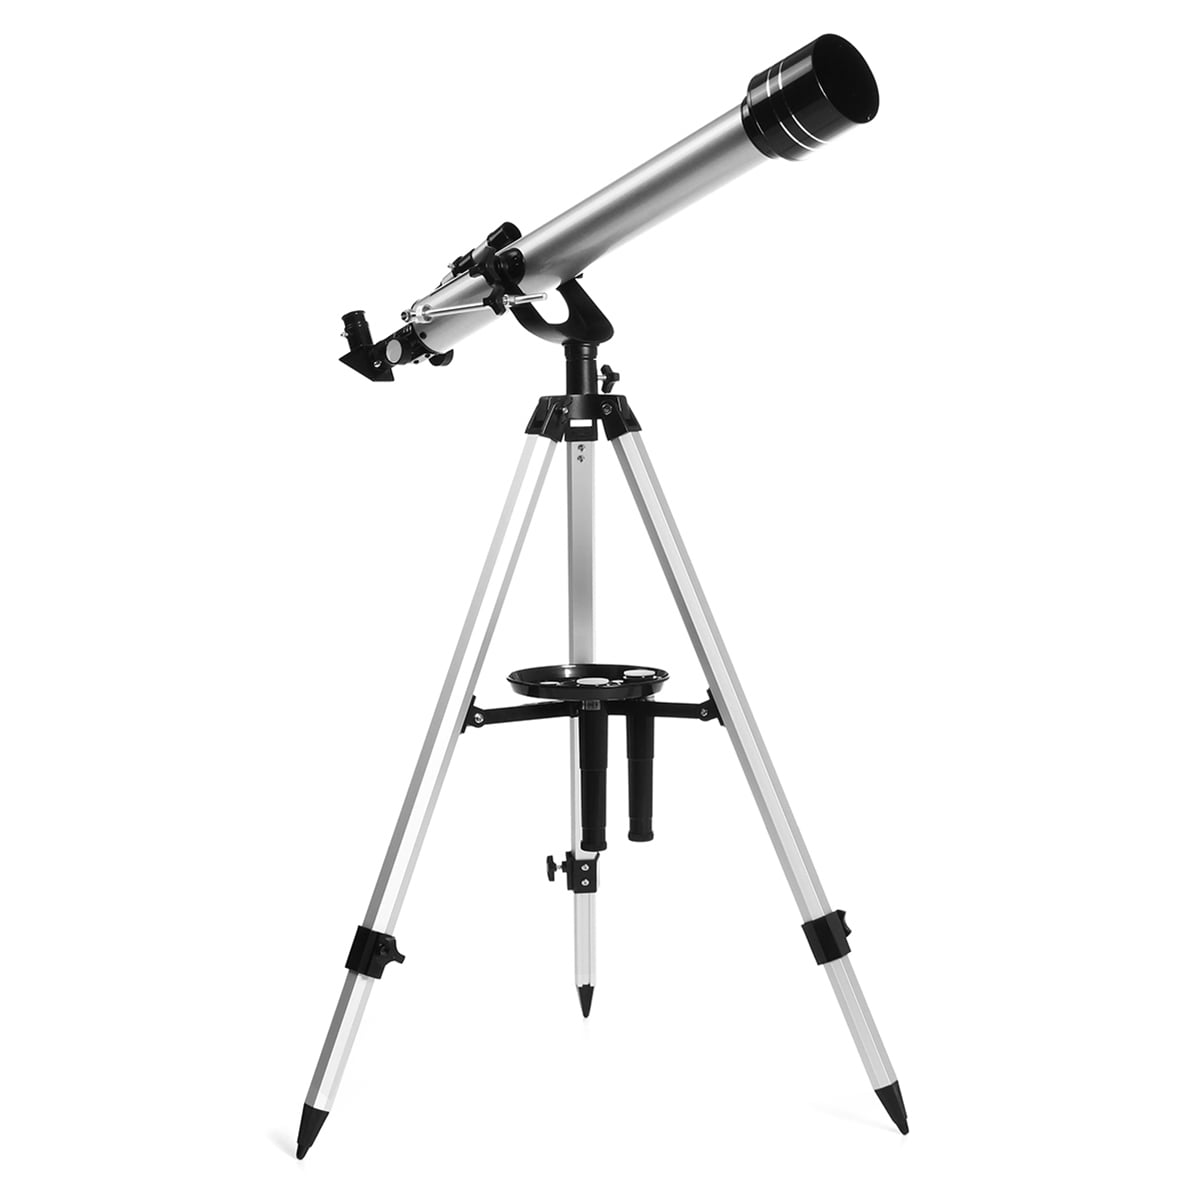 Sky Telescope Astronomical Telescope Professional with A Tripod Refracting Finder Mirror